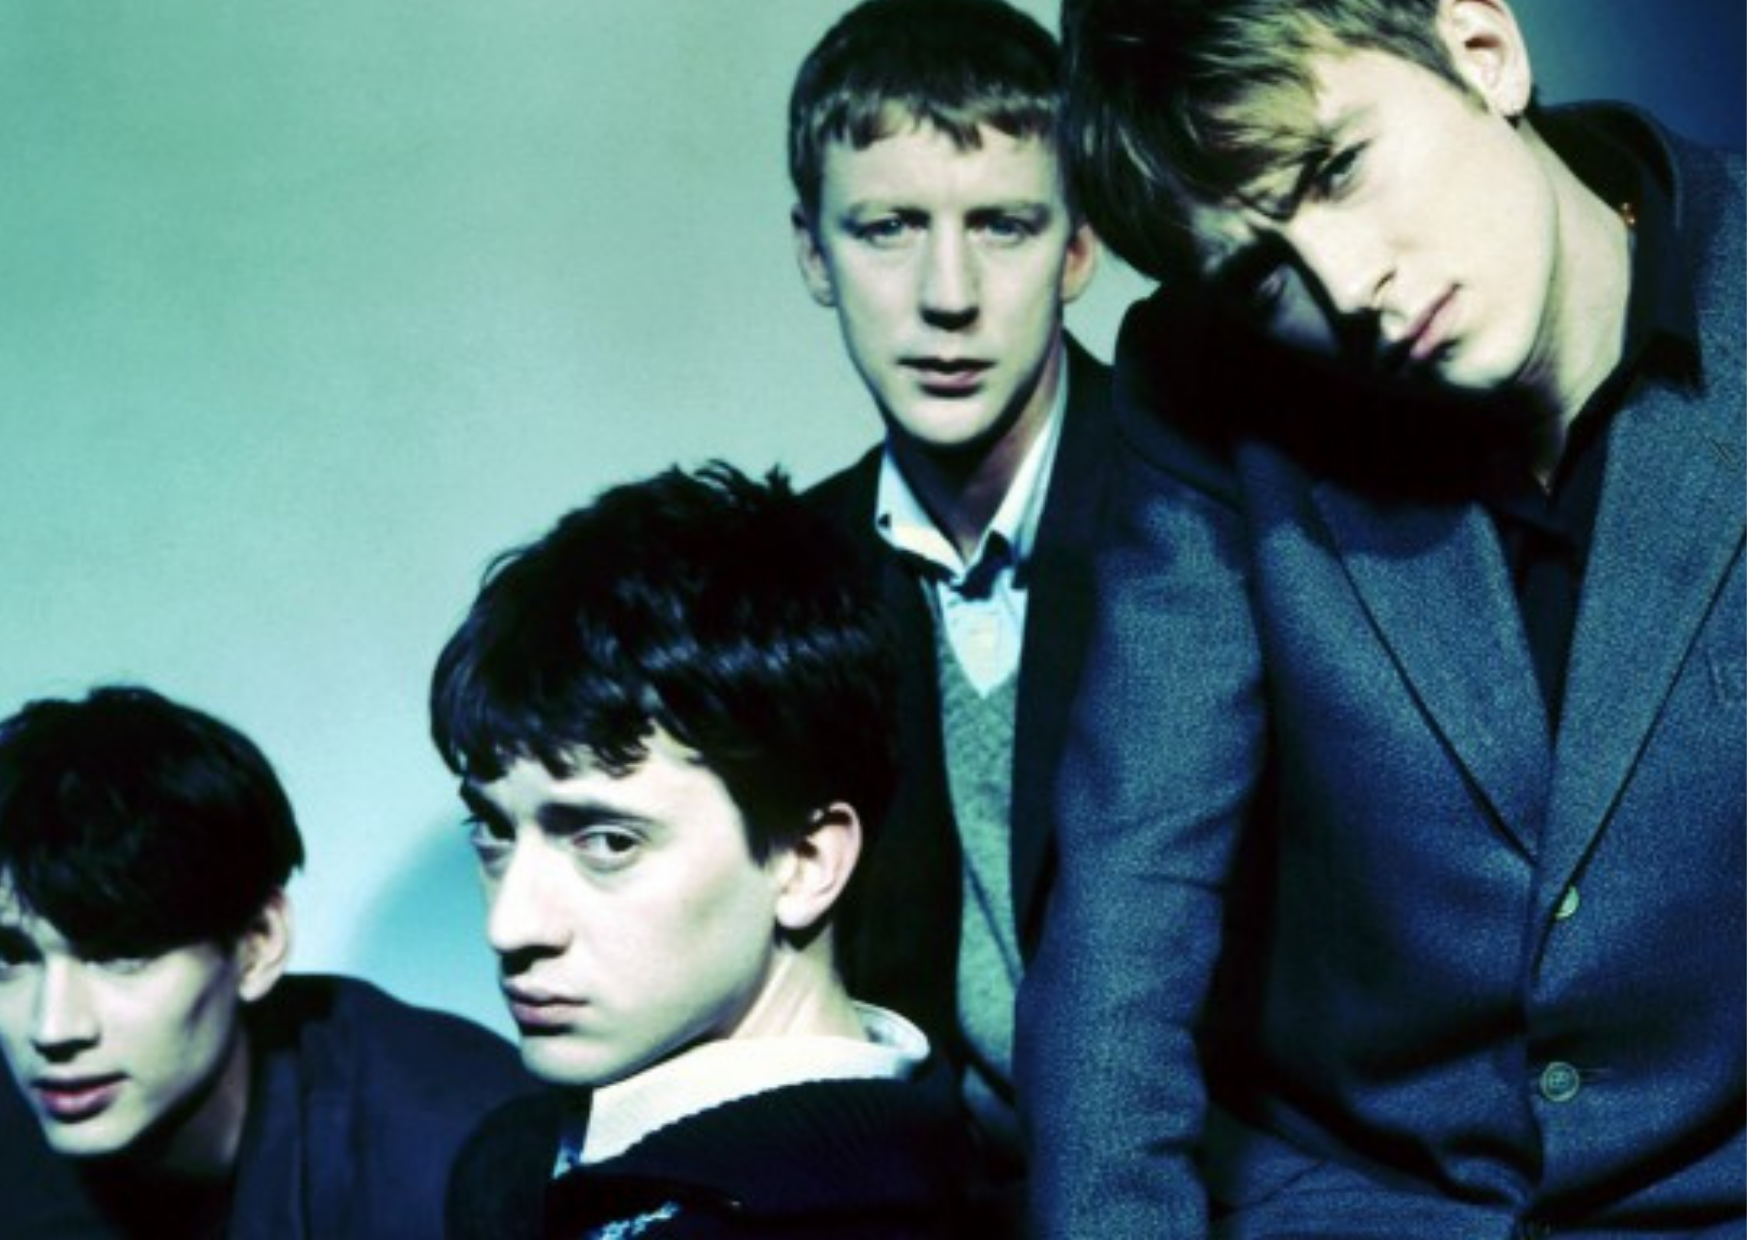 Pictured from left to right is Alex James, Graham Coxon, David Rowntree and Damon Albarn, of the band Blur, looking into the camera